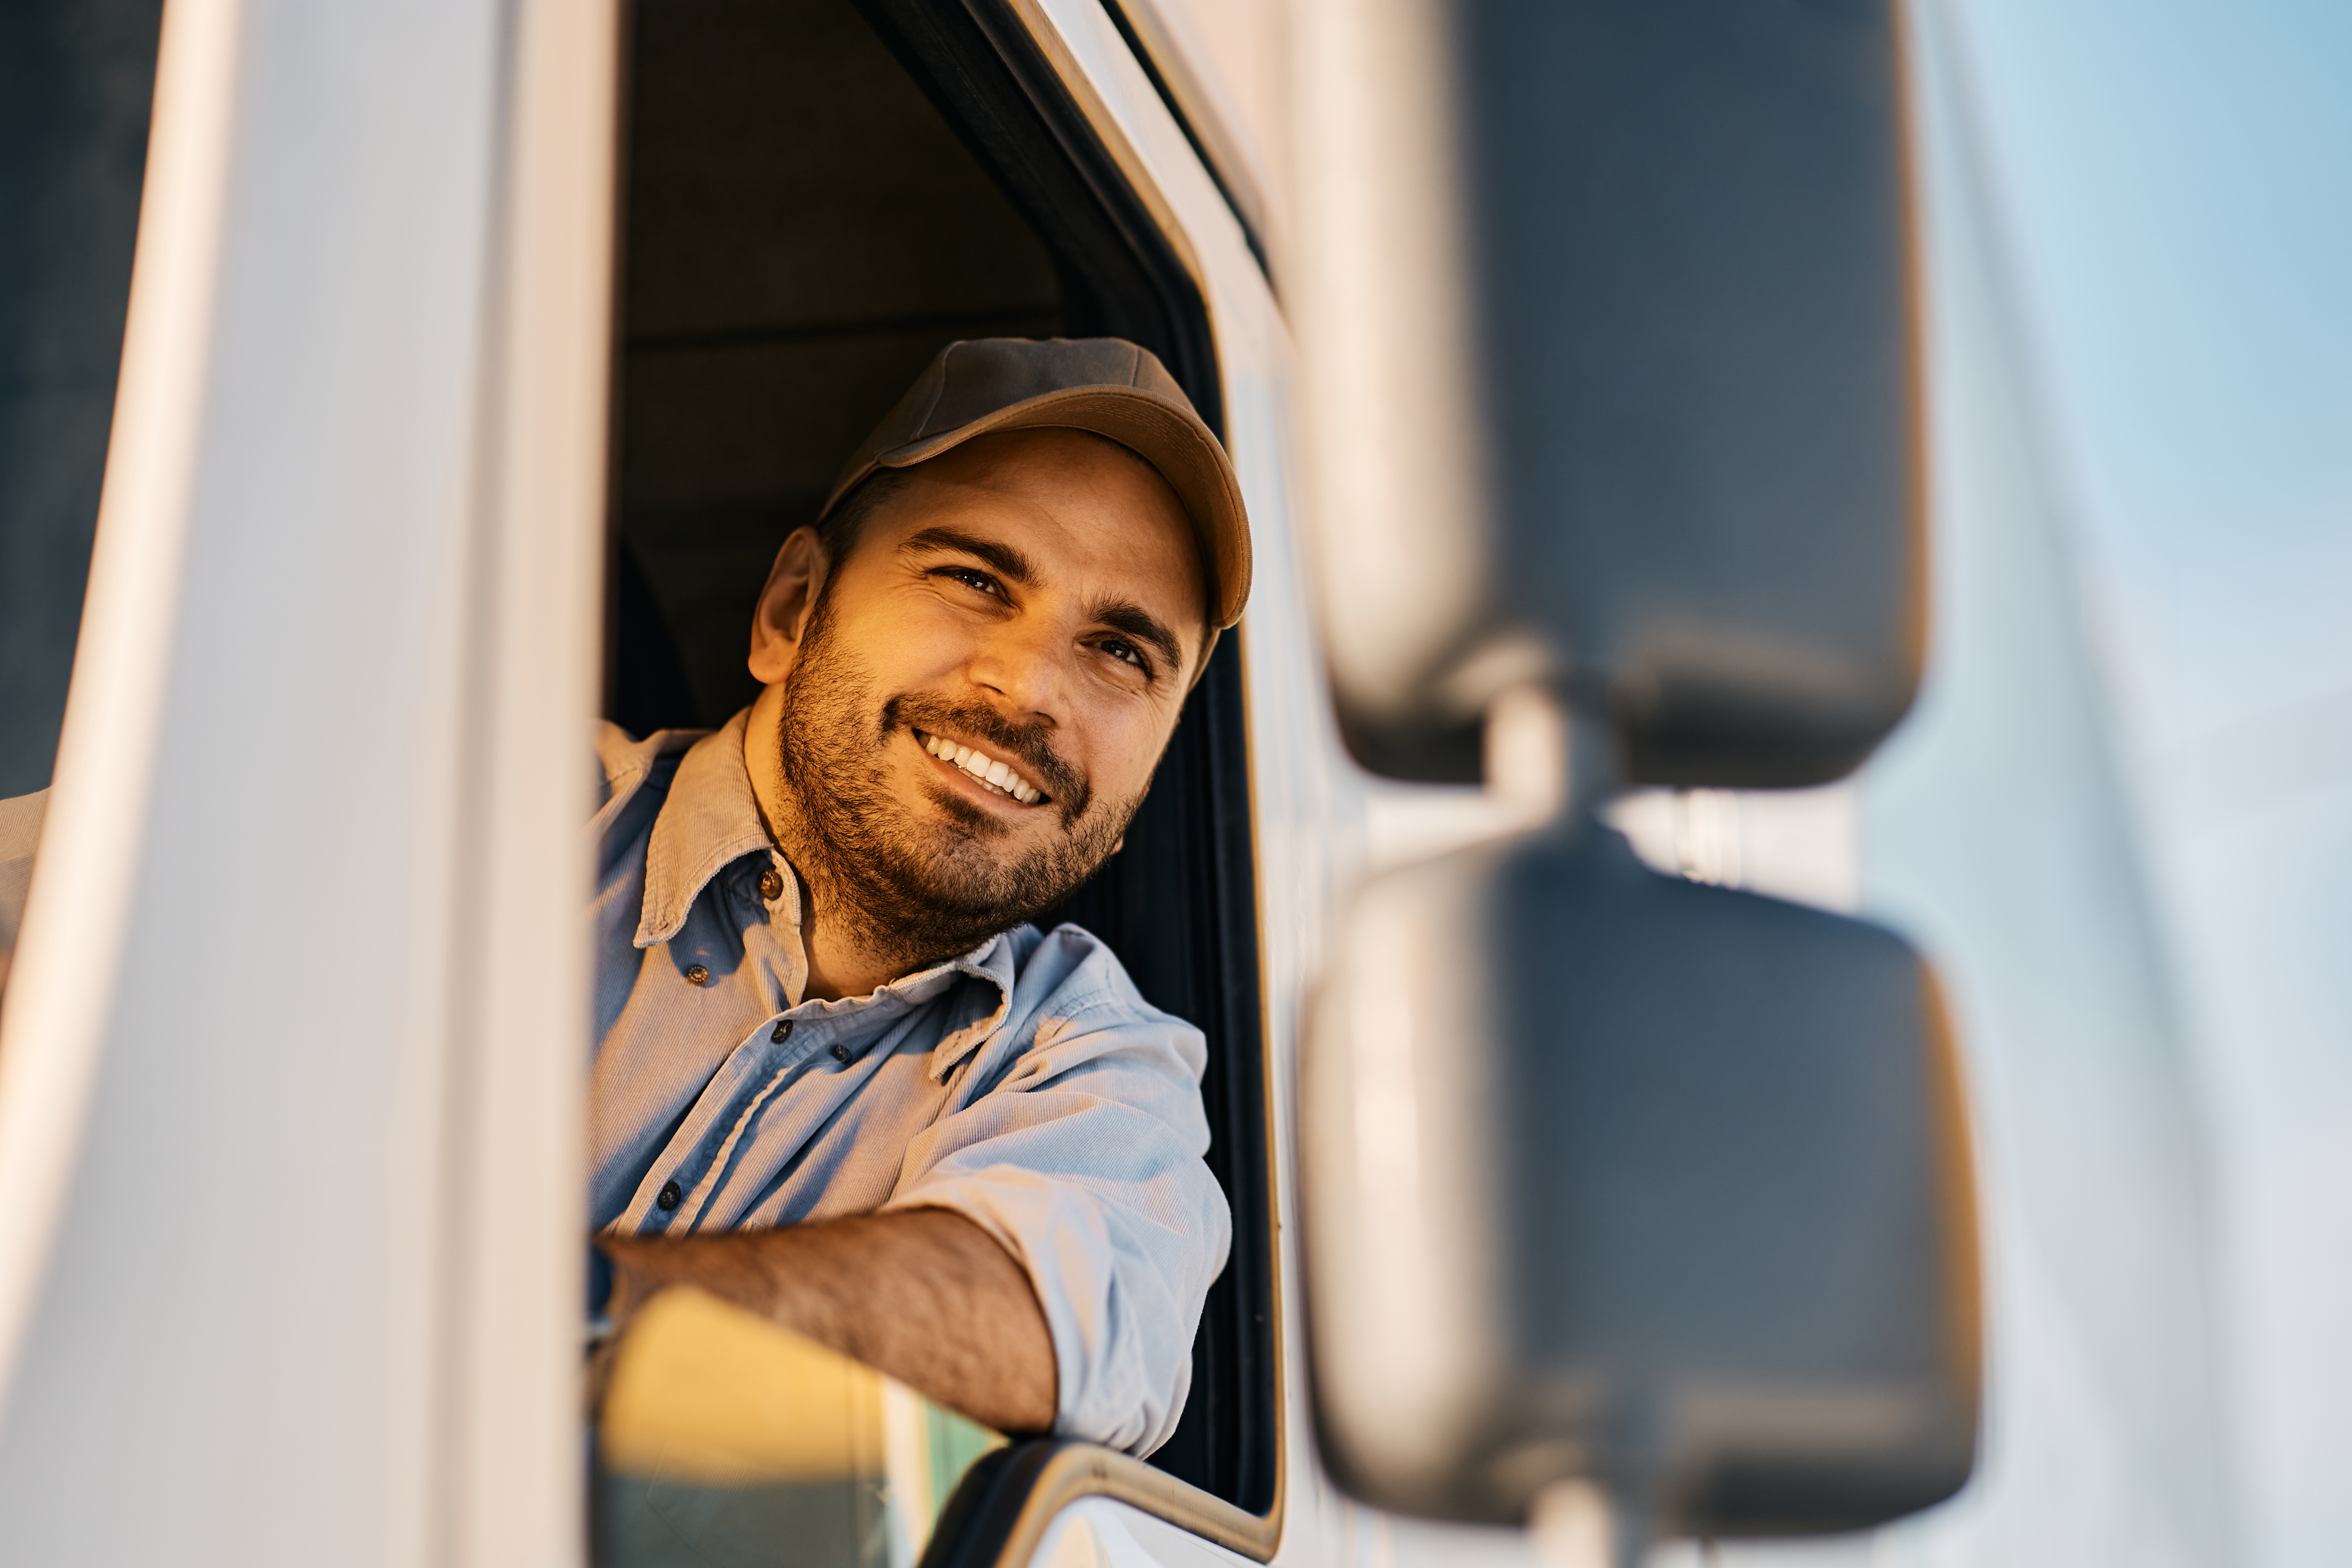 happy-truck-driver-looking-through-window-from-the-2022-11-29-22-44-05-utc